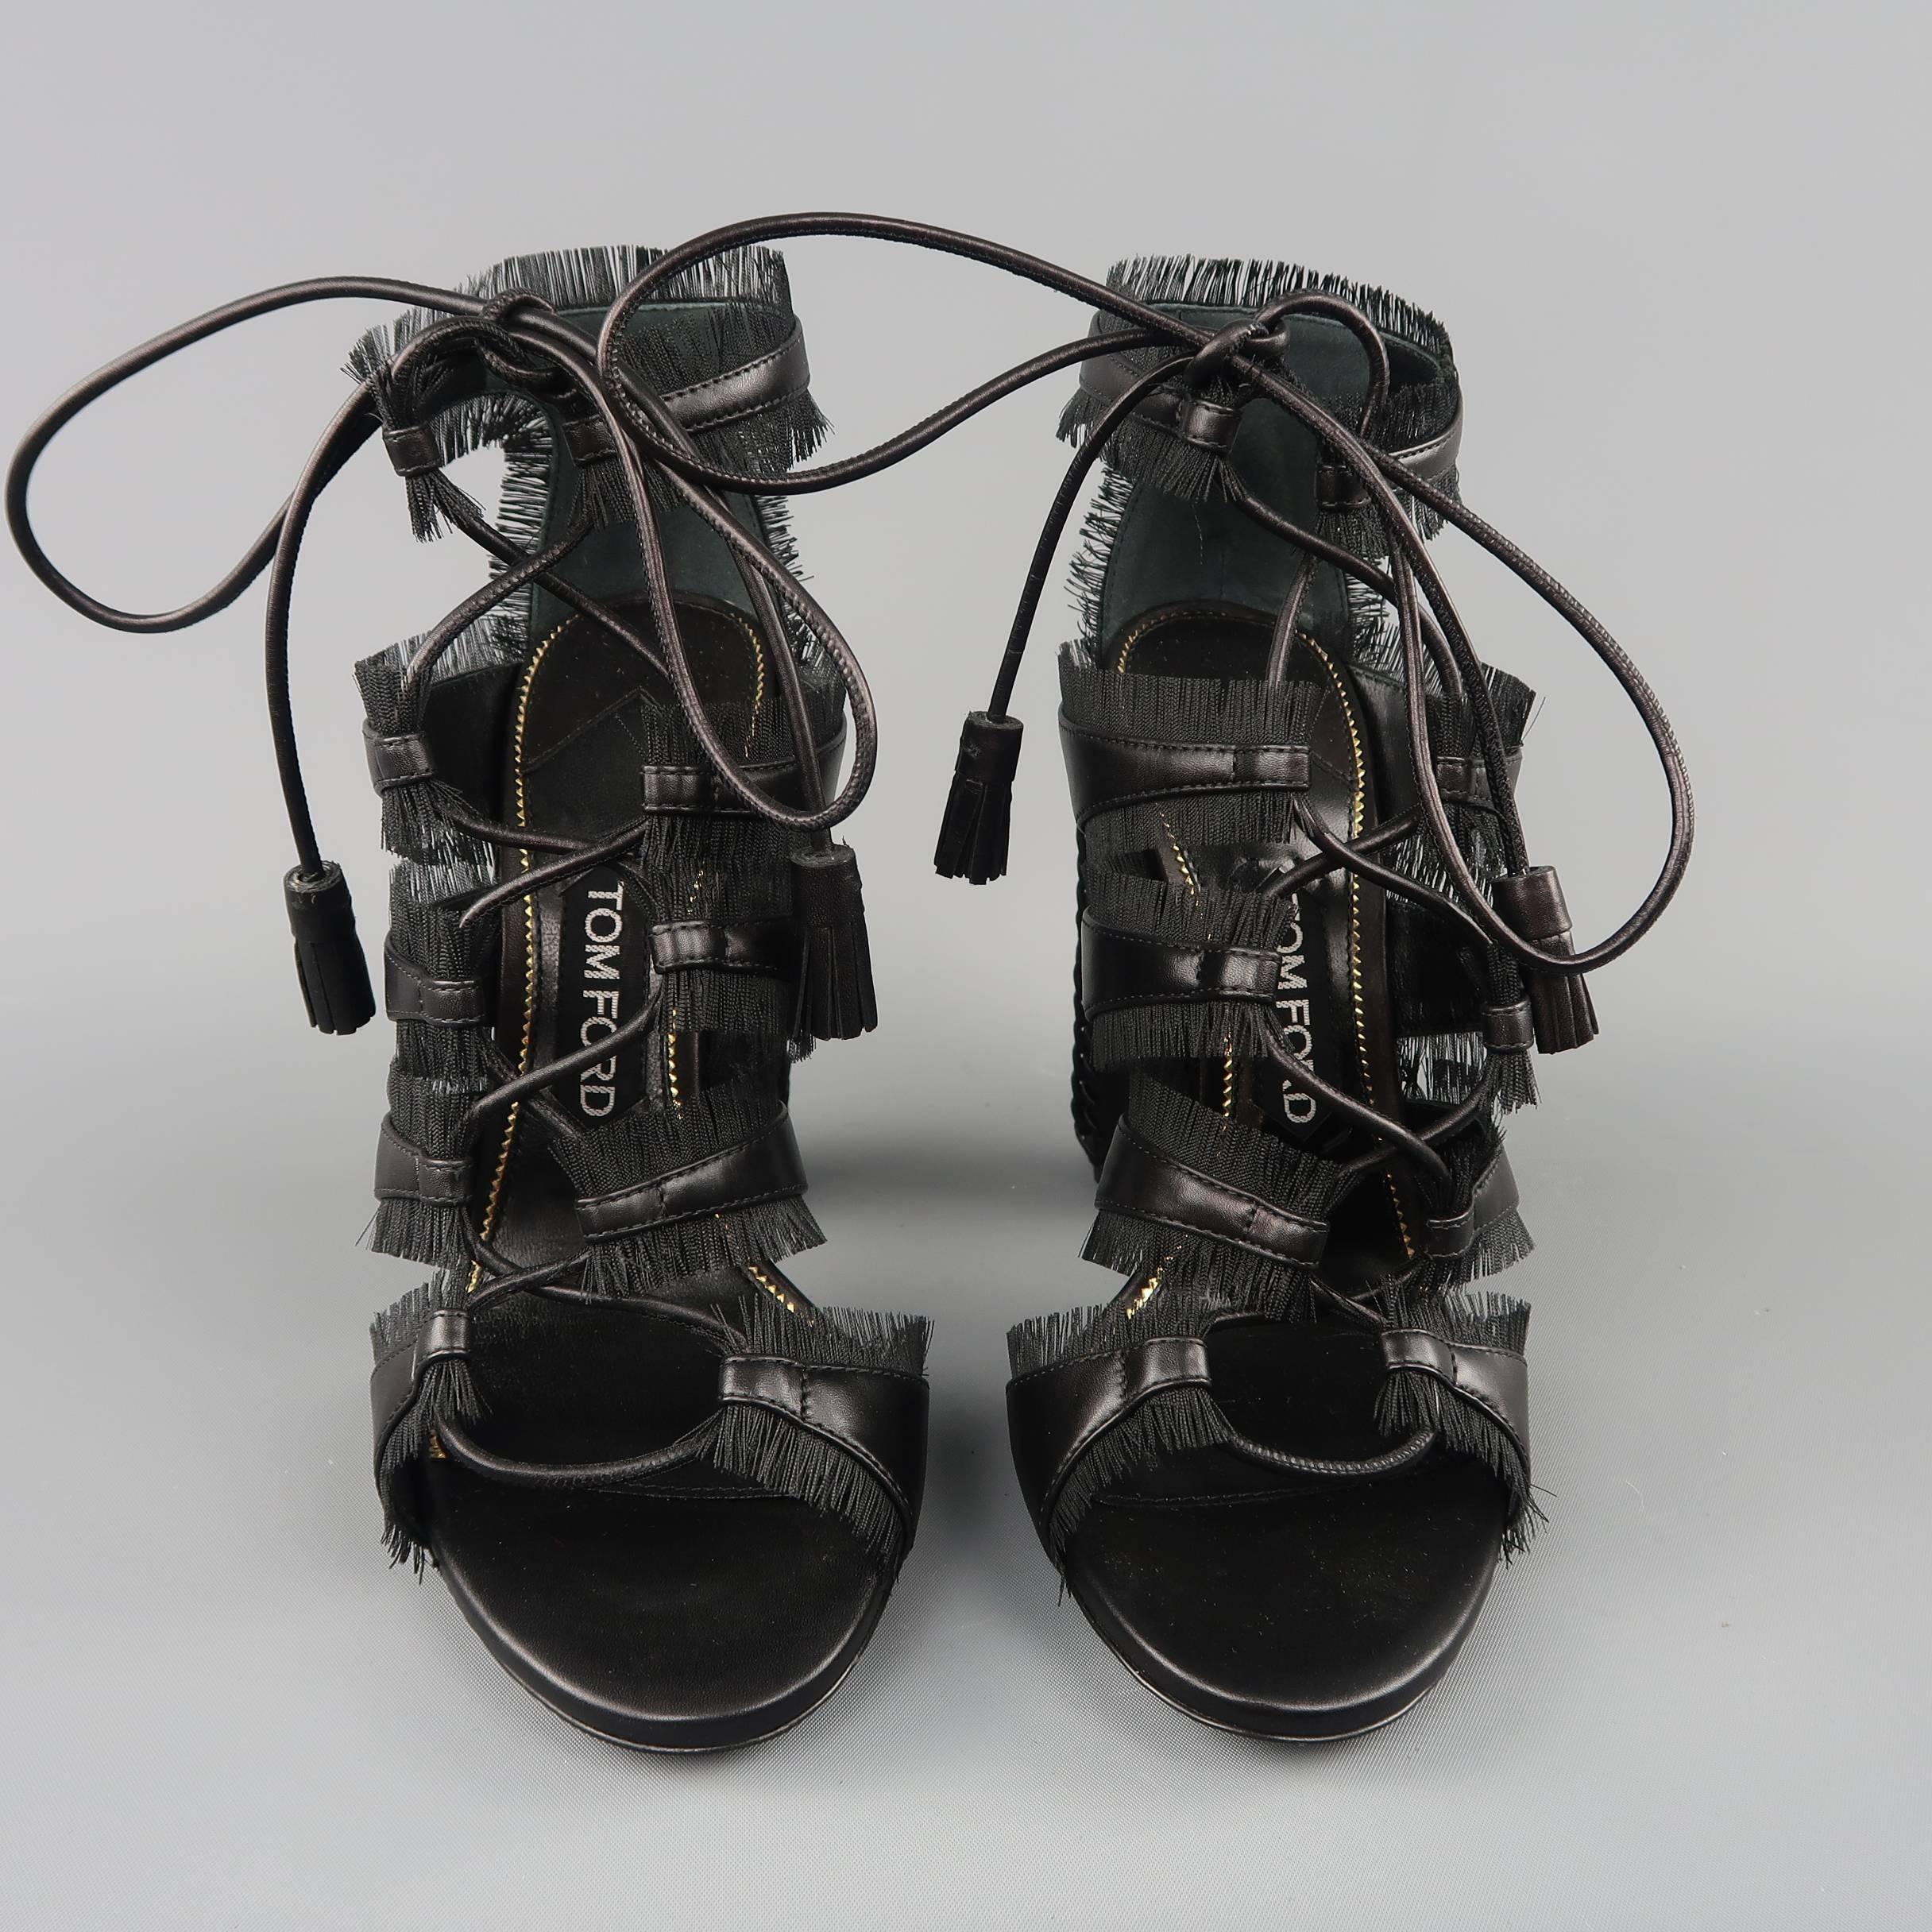 TOM FORD cage sandals come in black smooth leather with eyelash fringe trim, lace up front, and chunky heel with braided trim edges. Made in Italy.  Retails: $1490.00
 
Brand New.
Marked: IT 38
 
Heel: 4.5 in.
